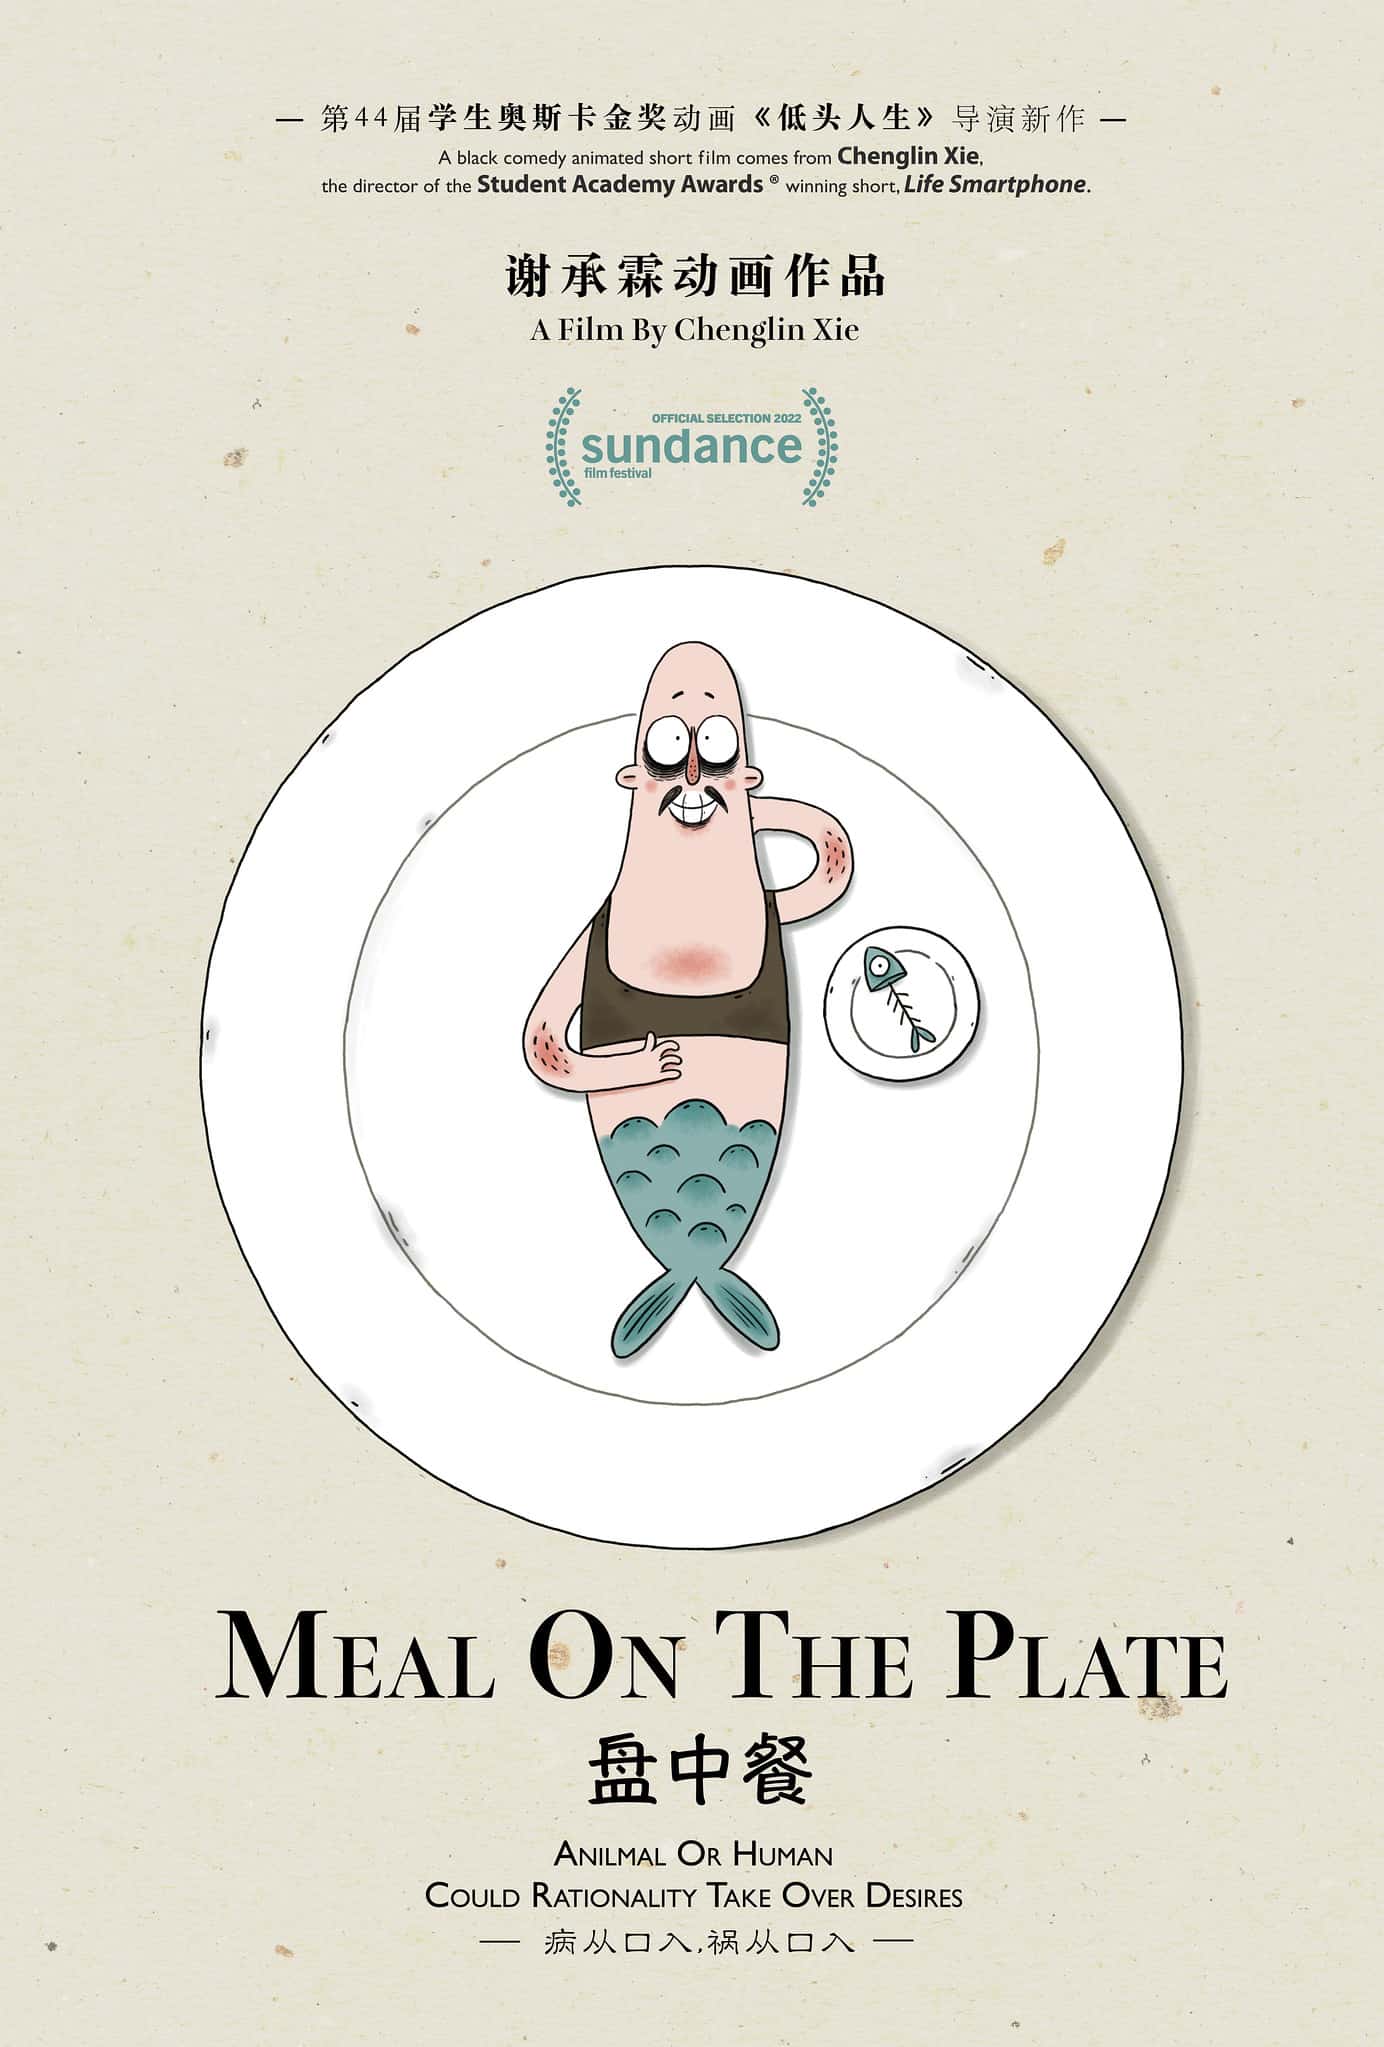 The movie poster for Meal On The Plate, featuring a man becoming a fish